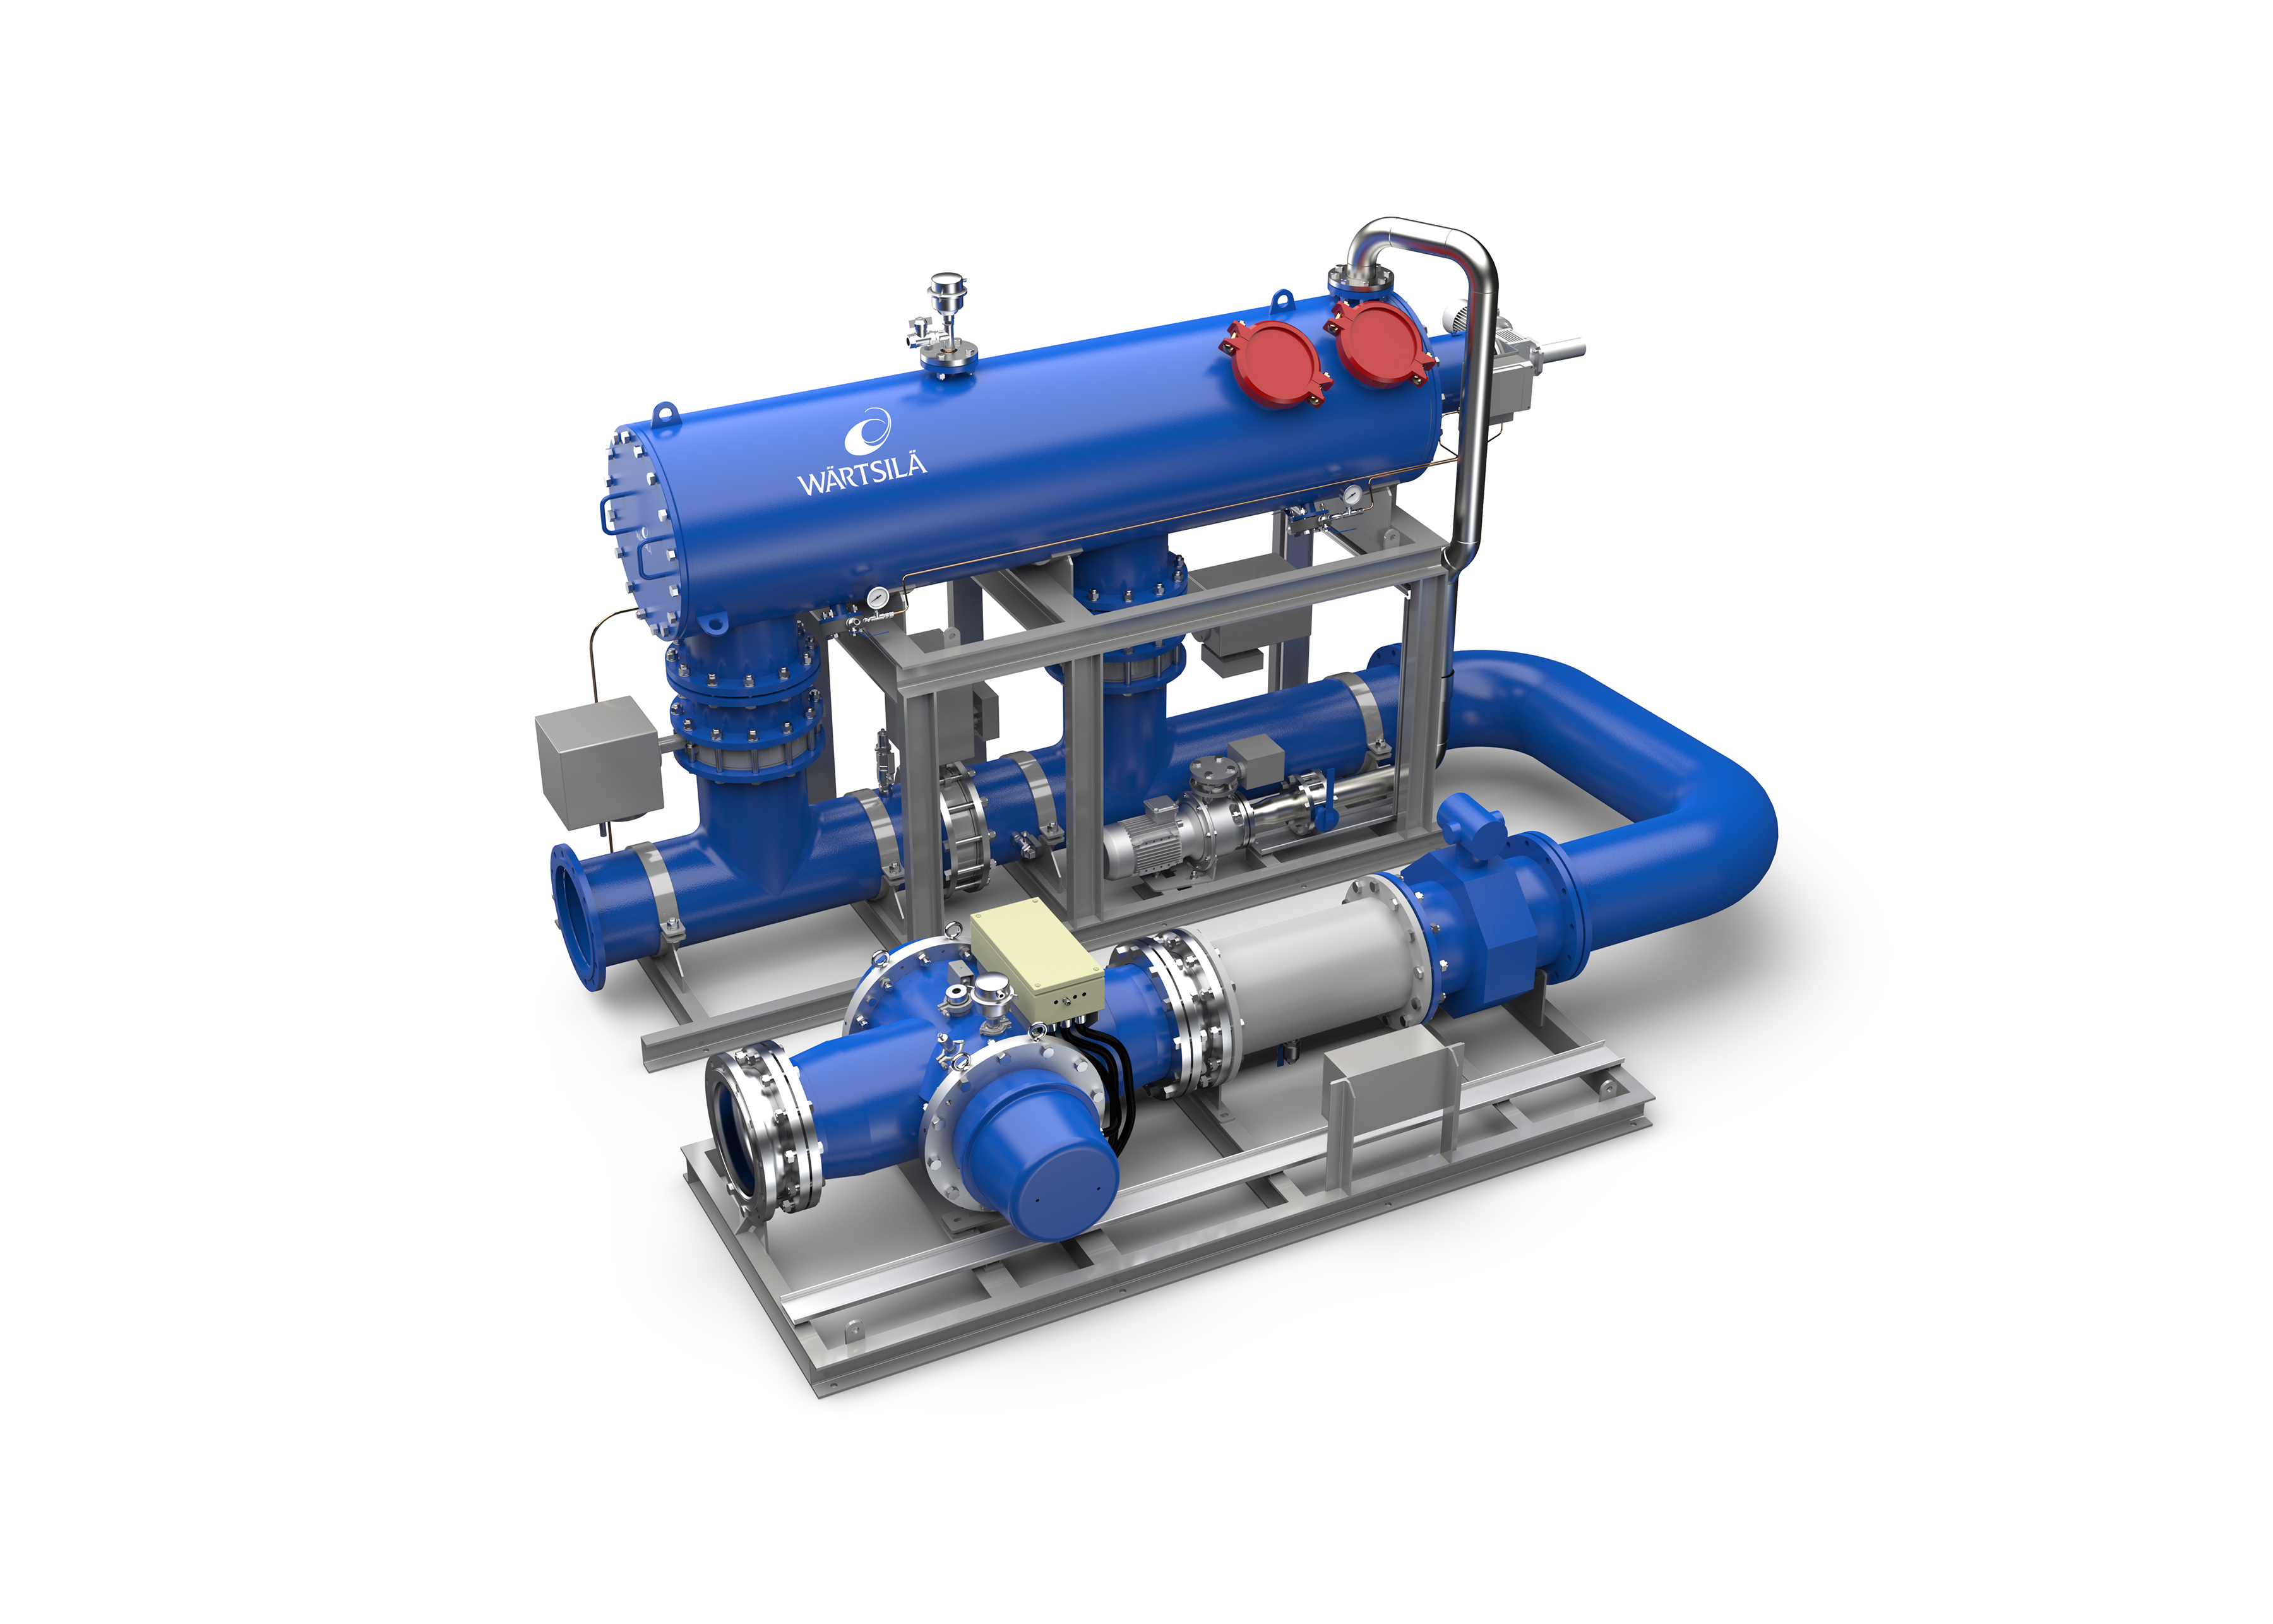 The Wärtsilä Aquarius UV Ballast Water Management system utilises a two-stage approach involving filtration and medium pressure UV disinfection technology.